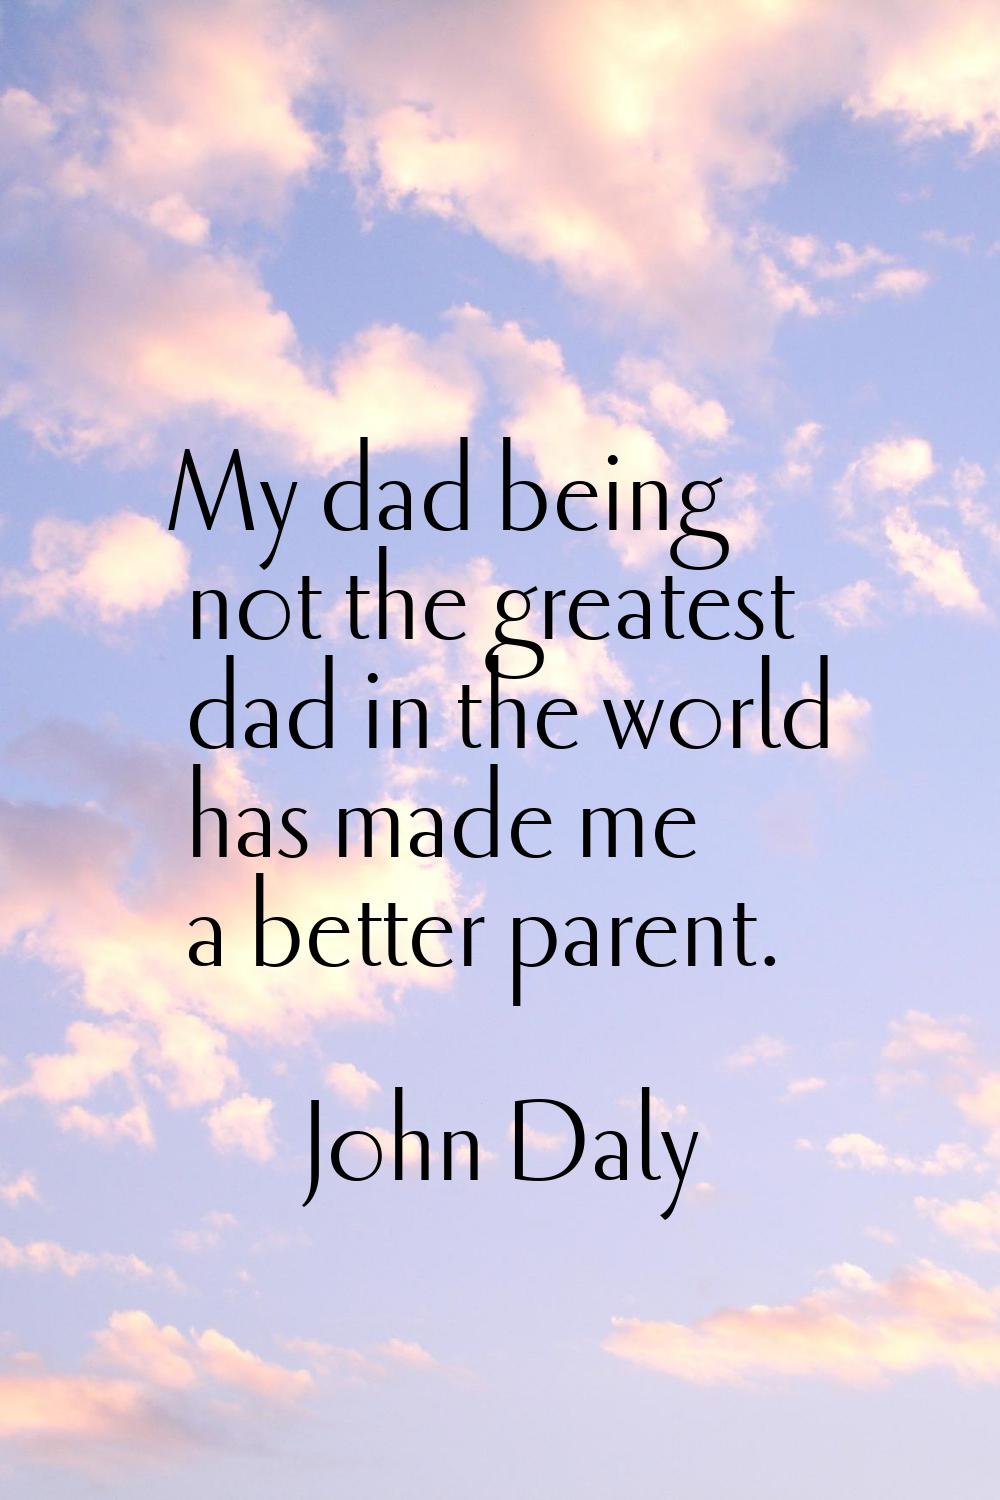 My dad being not the greatest dad in the world has made me a better parent.